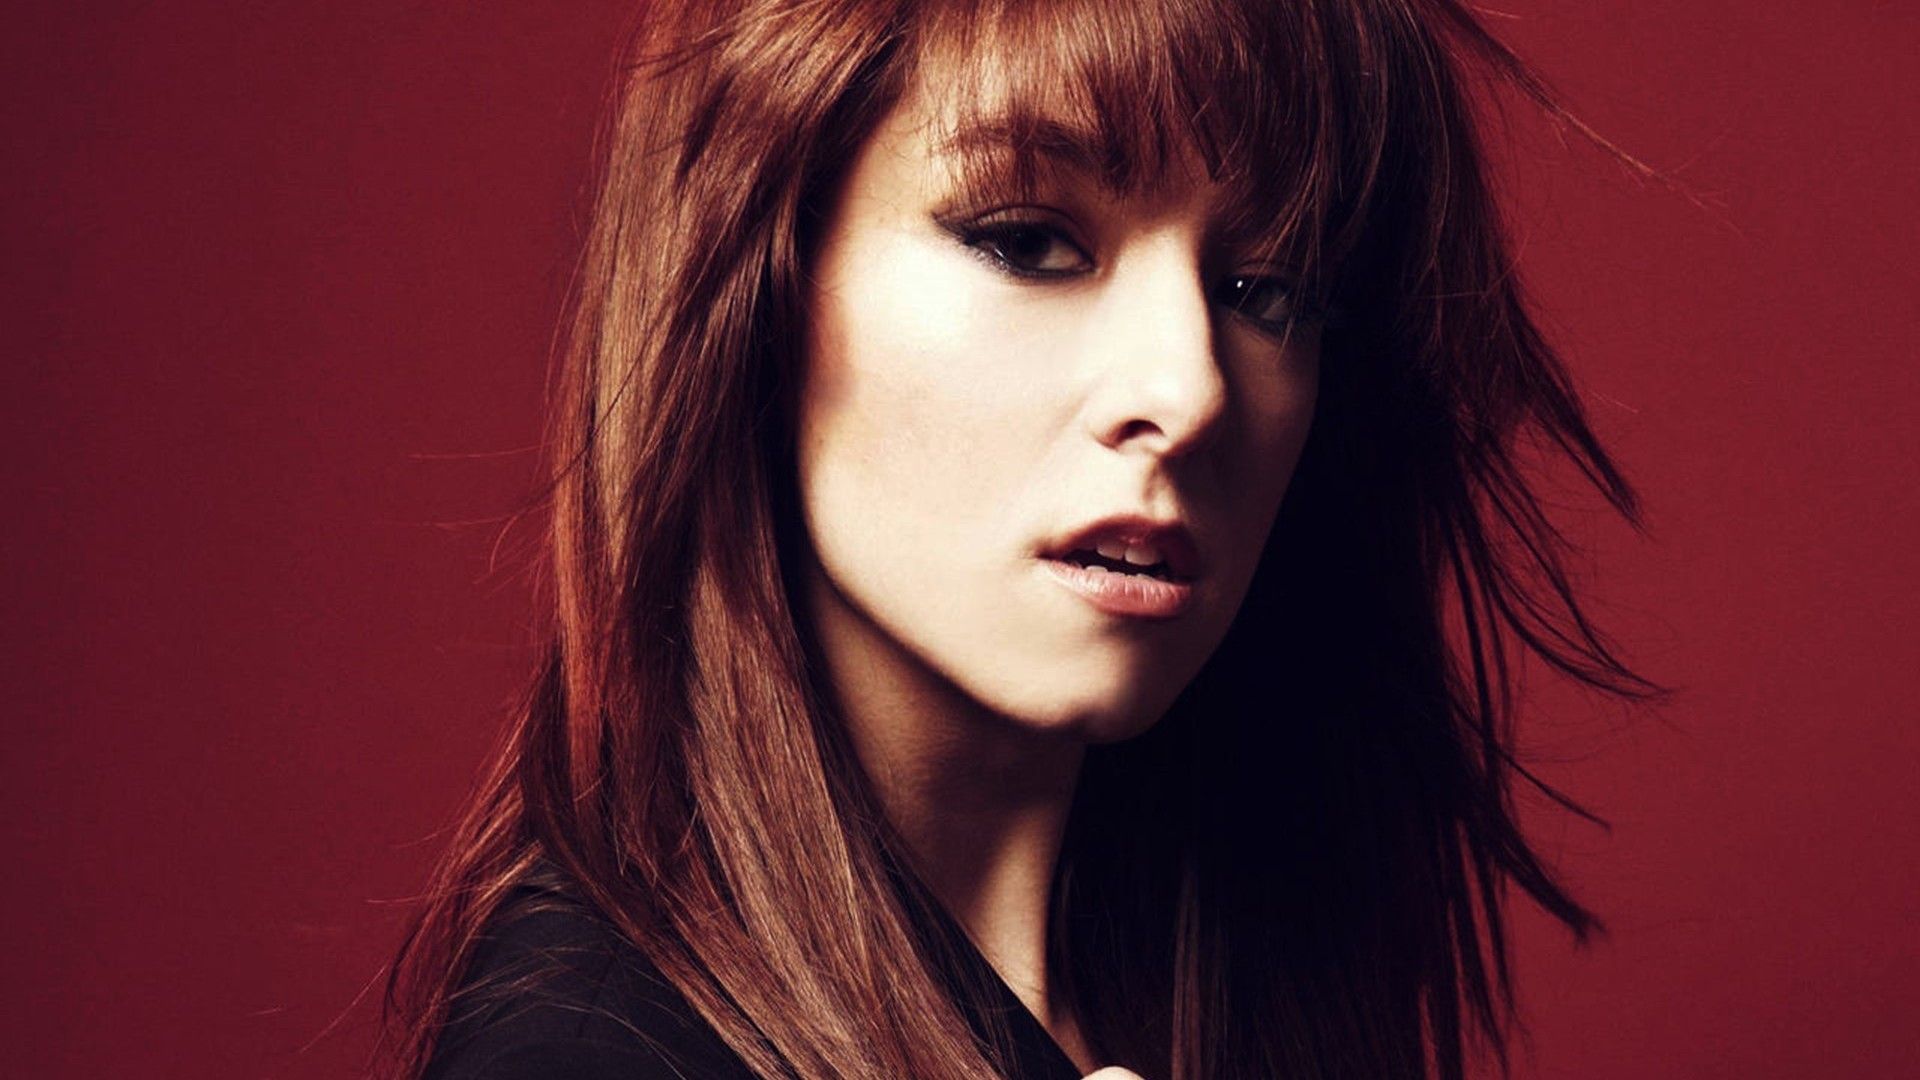 Female Model Christina Grimmie wallpapers and images - wallpapers ...